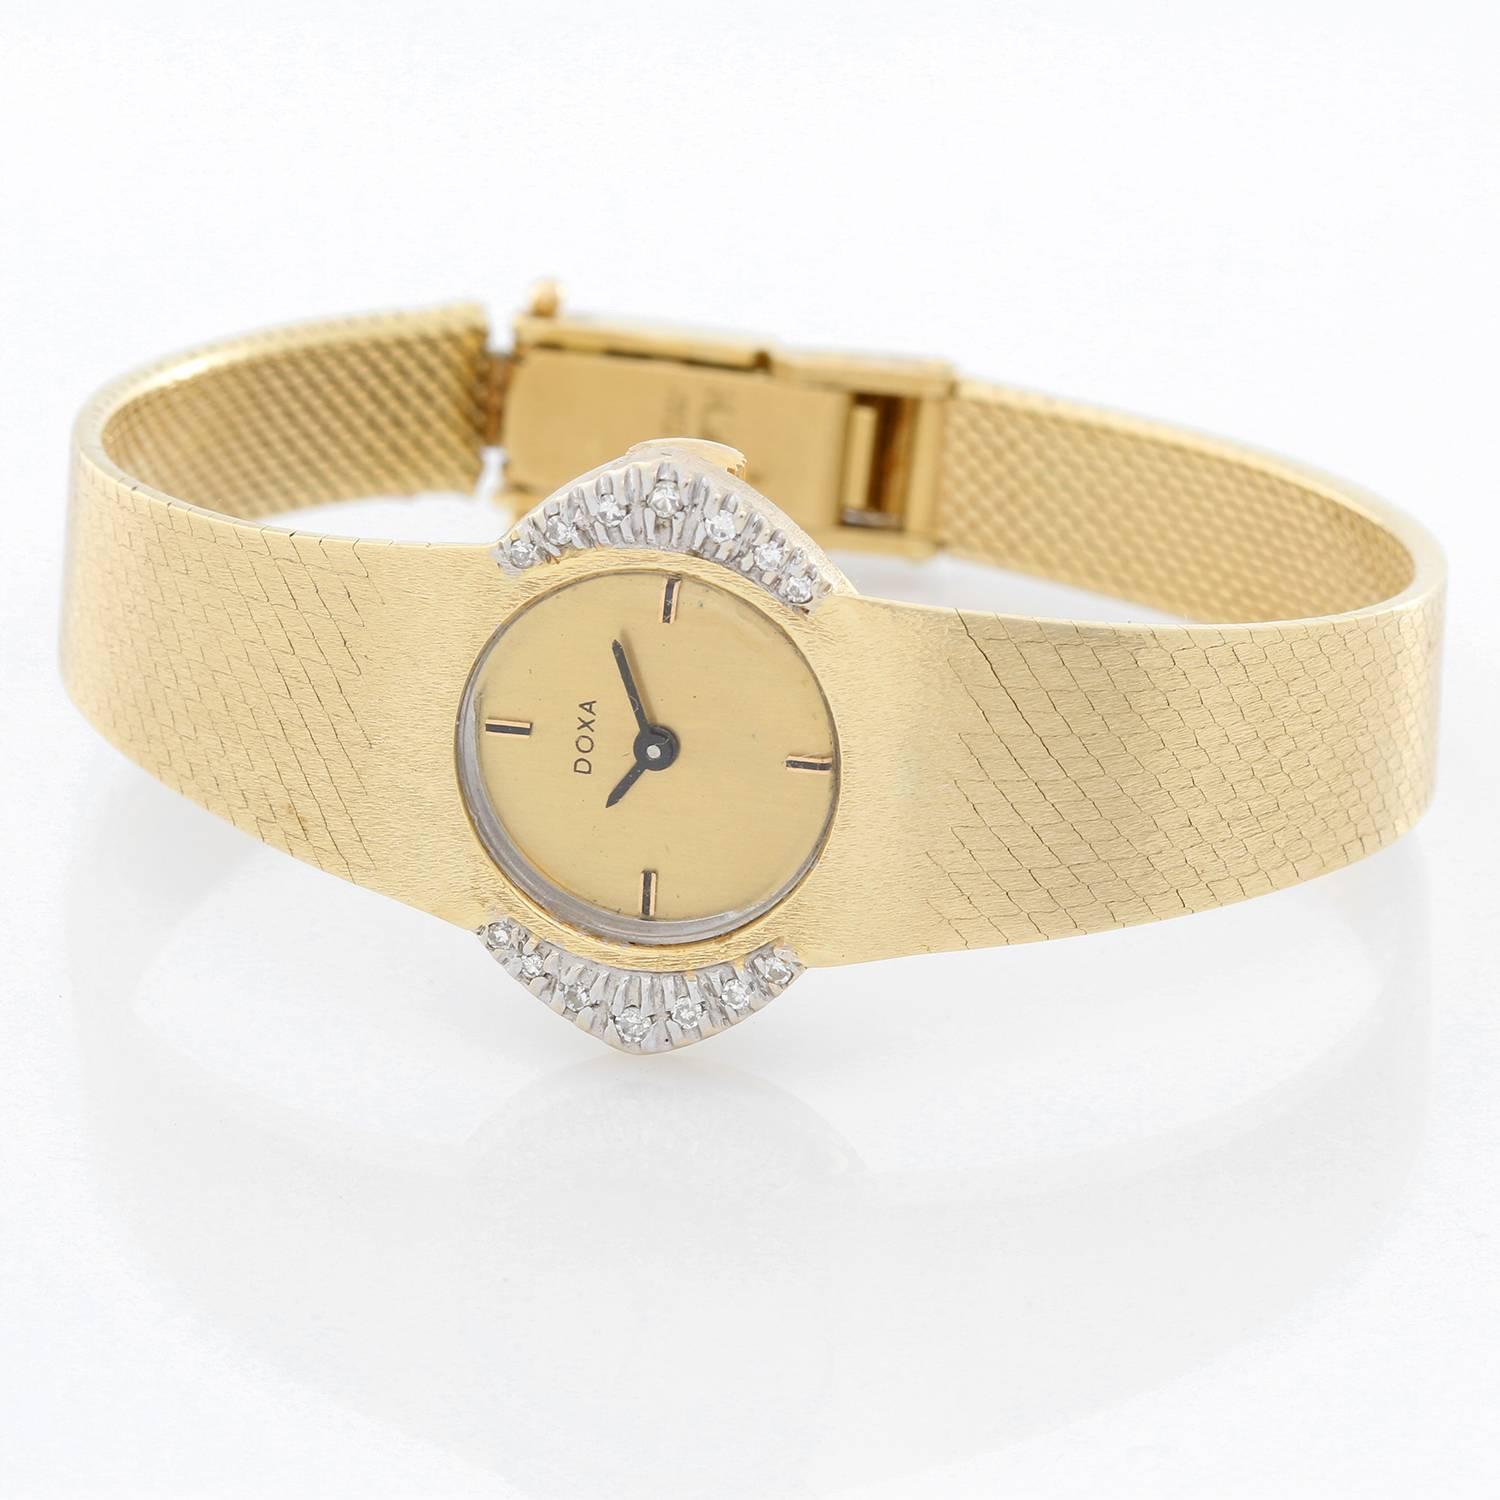 Doxa Classique 14K Yellow Gold Watch  - Manual winding . 14K Yellow Gold ( 23 mm ) with diamonds on the sides . Champagne dial with hour stick markers at 12, 3, 6, 9 o'clock . 14K Yellow Gold hammered mesh bracelet . Pre-owned with custom box. Wrist